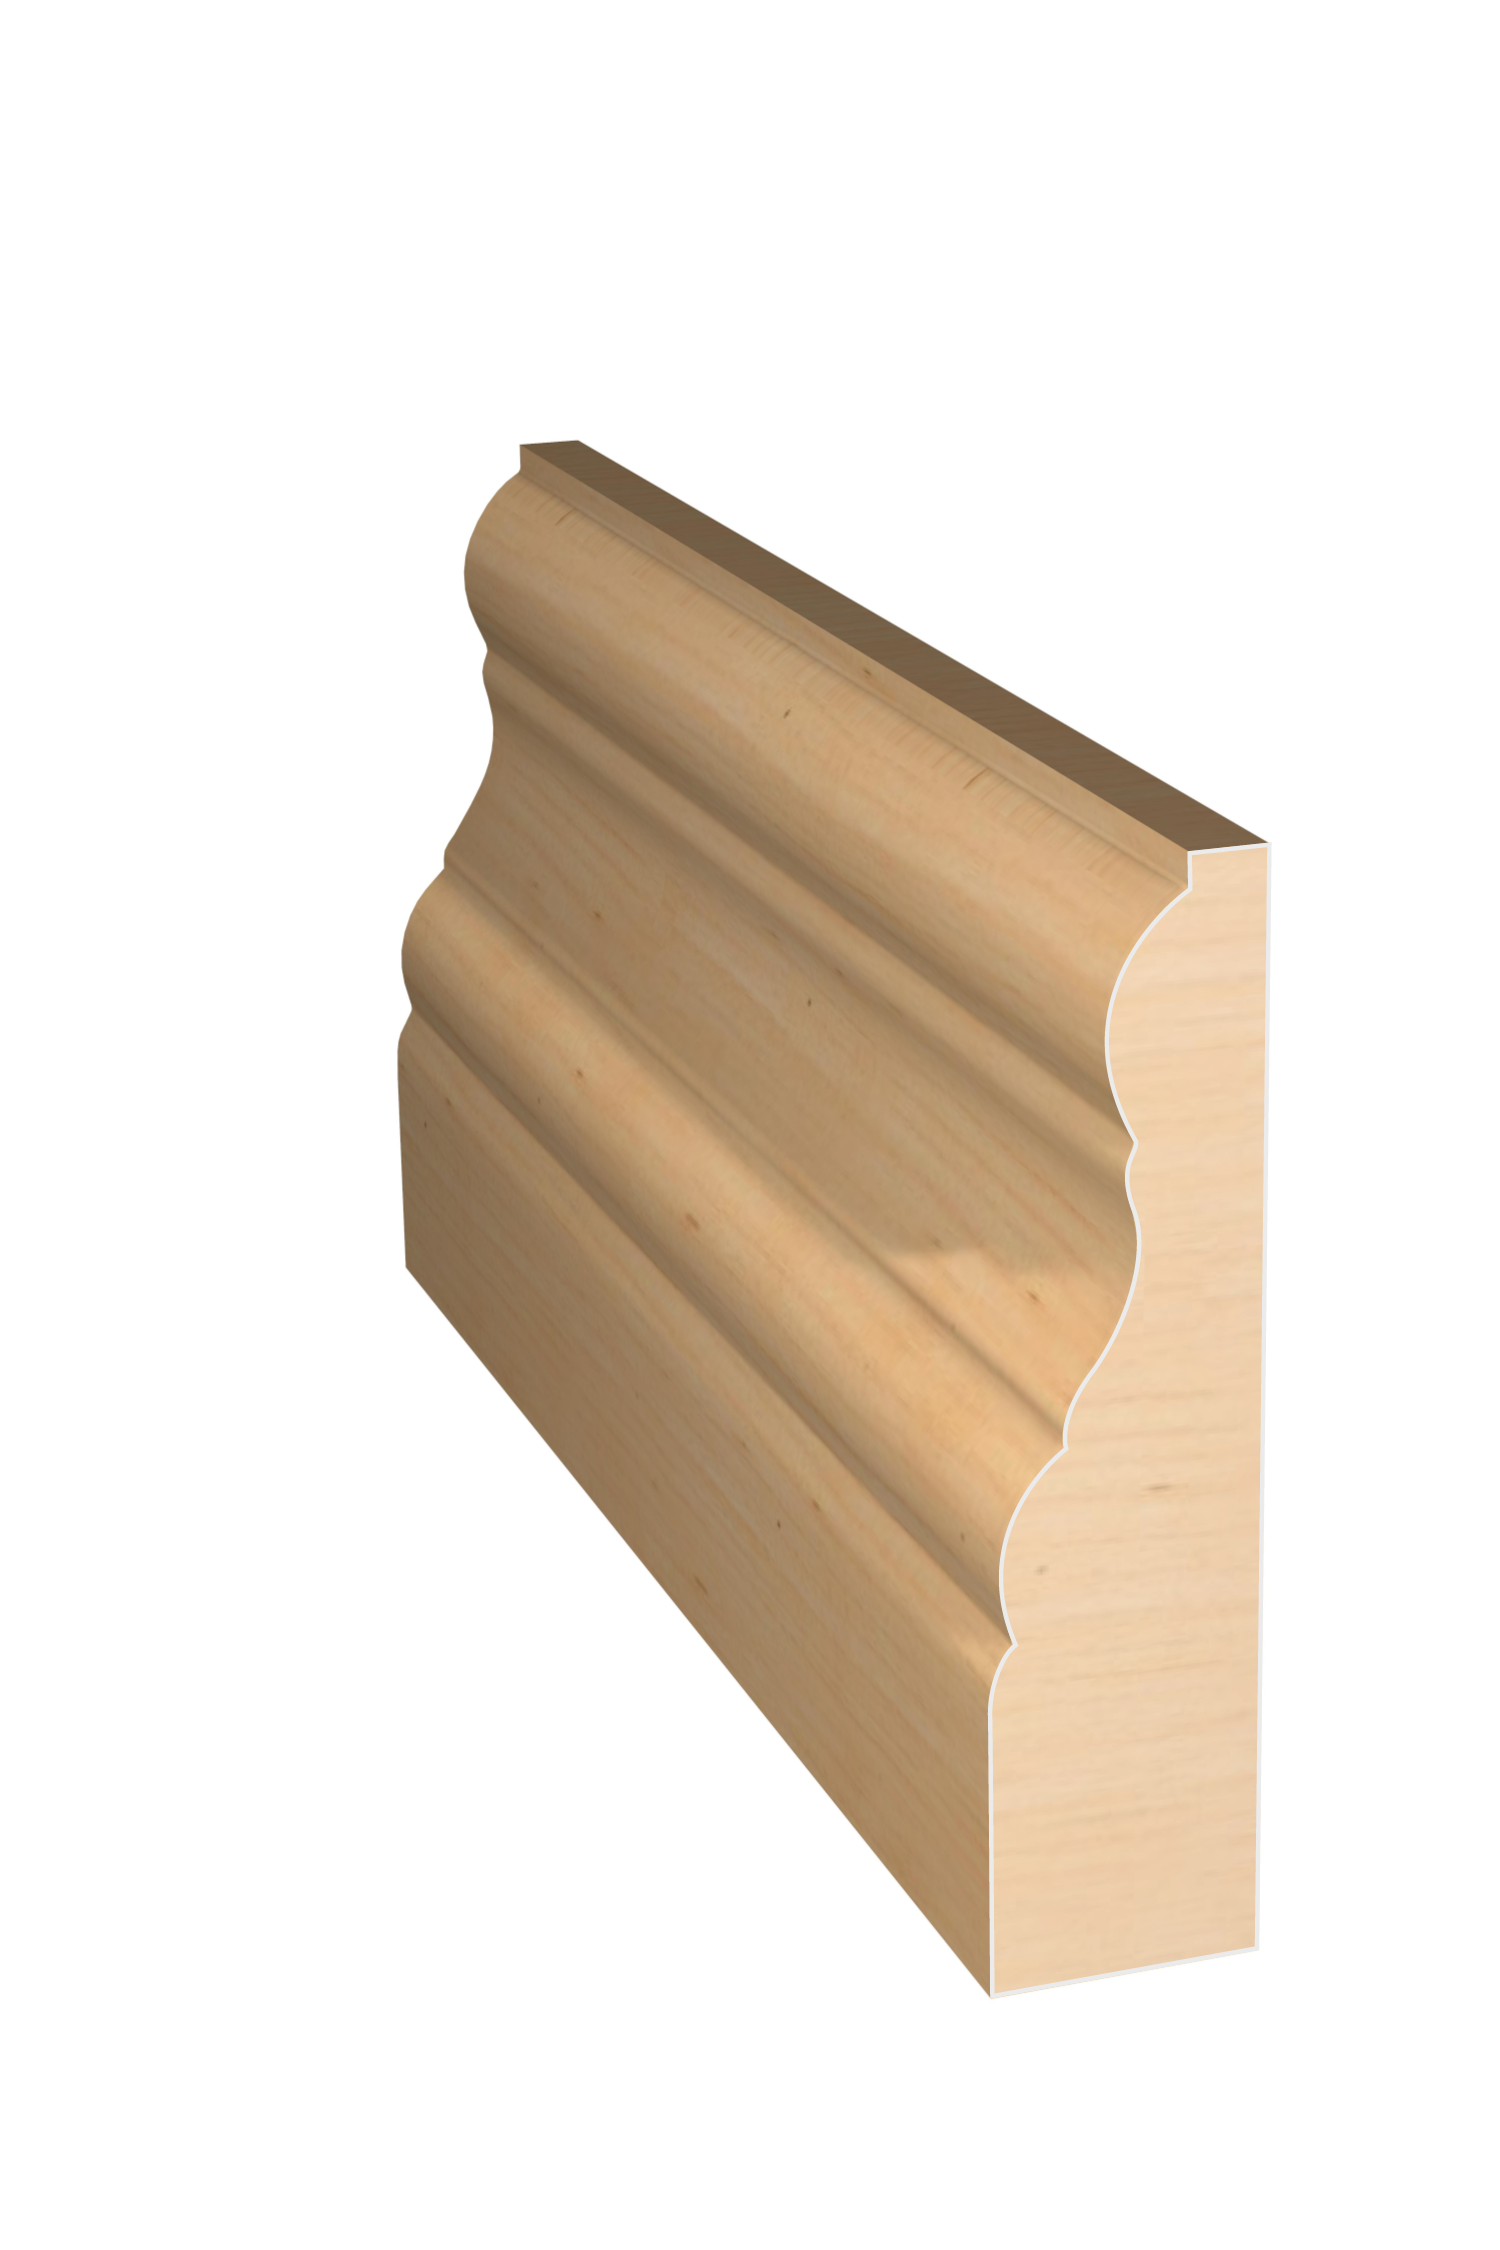 Three dimensional rendering of custom casing wood molding CAPL312 made by Public Lumber Company in Detroit.